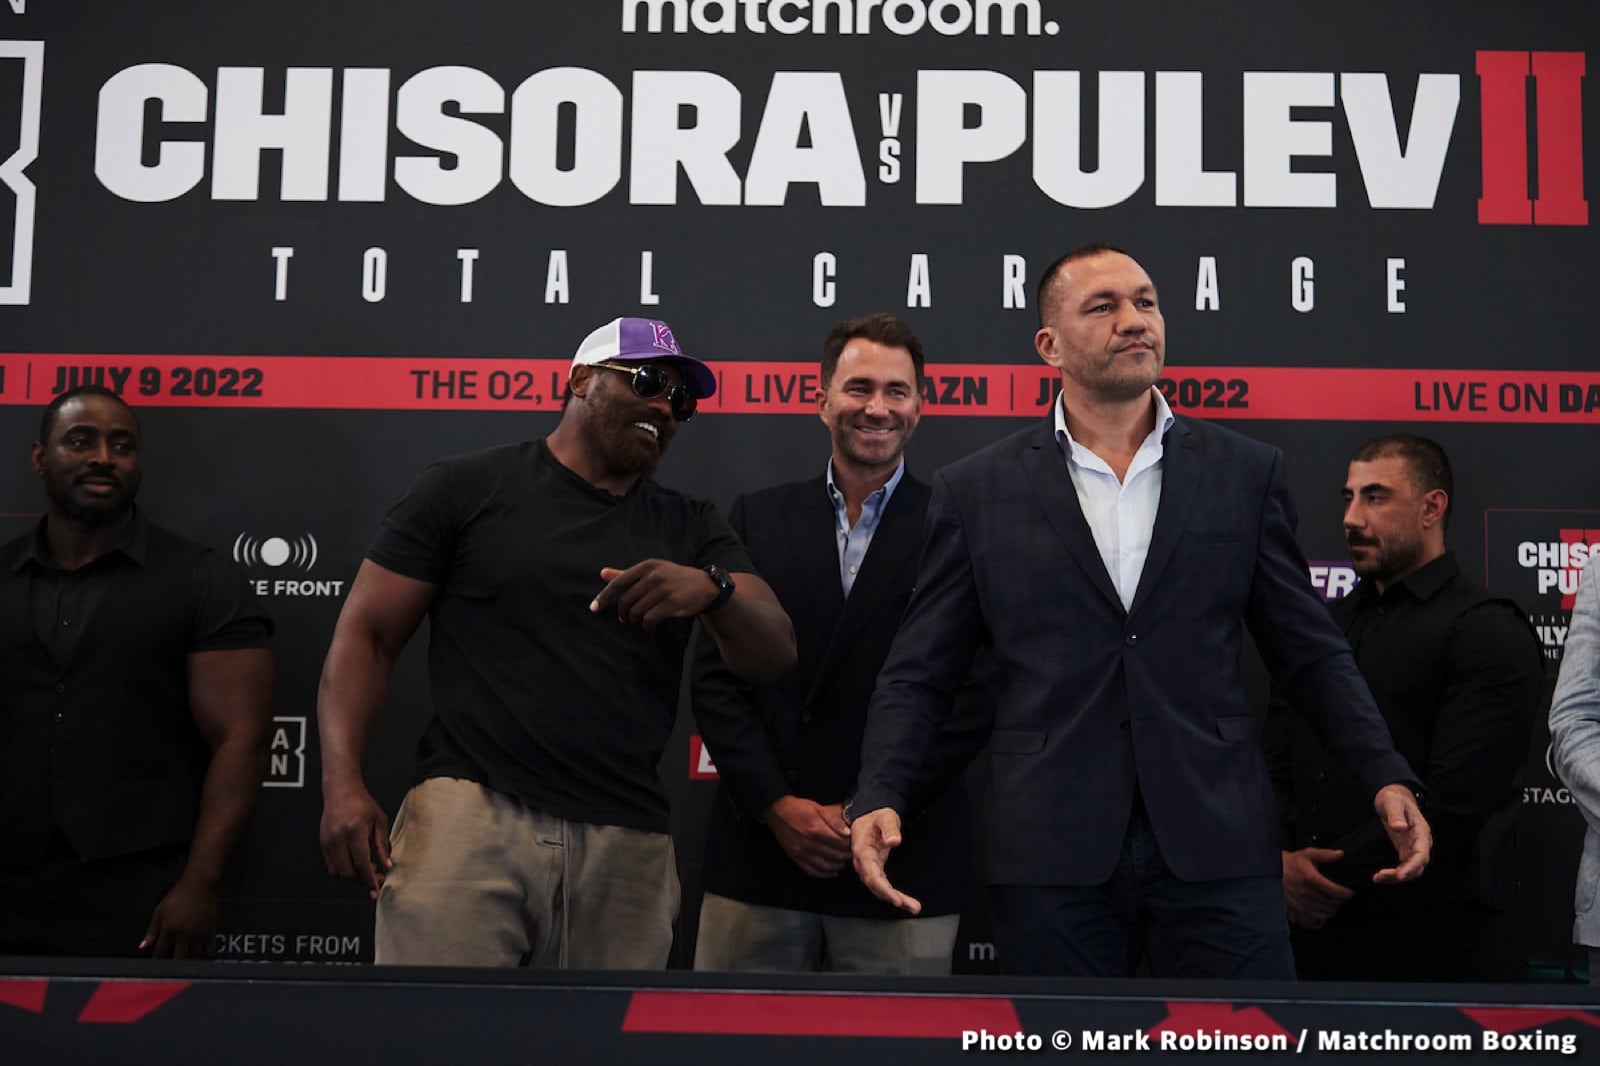 Image: Eddie Hearn wants big fight for Chisora if he beats Pulev on July 9th